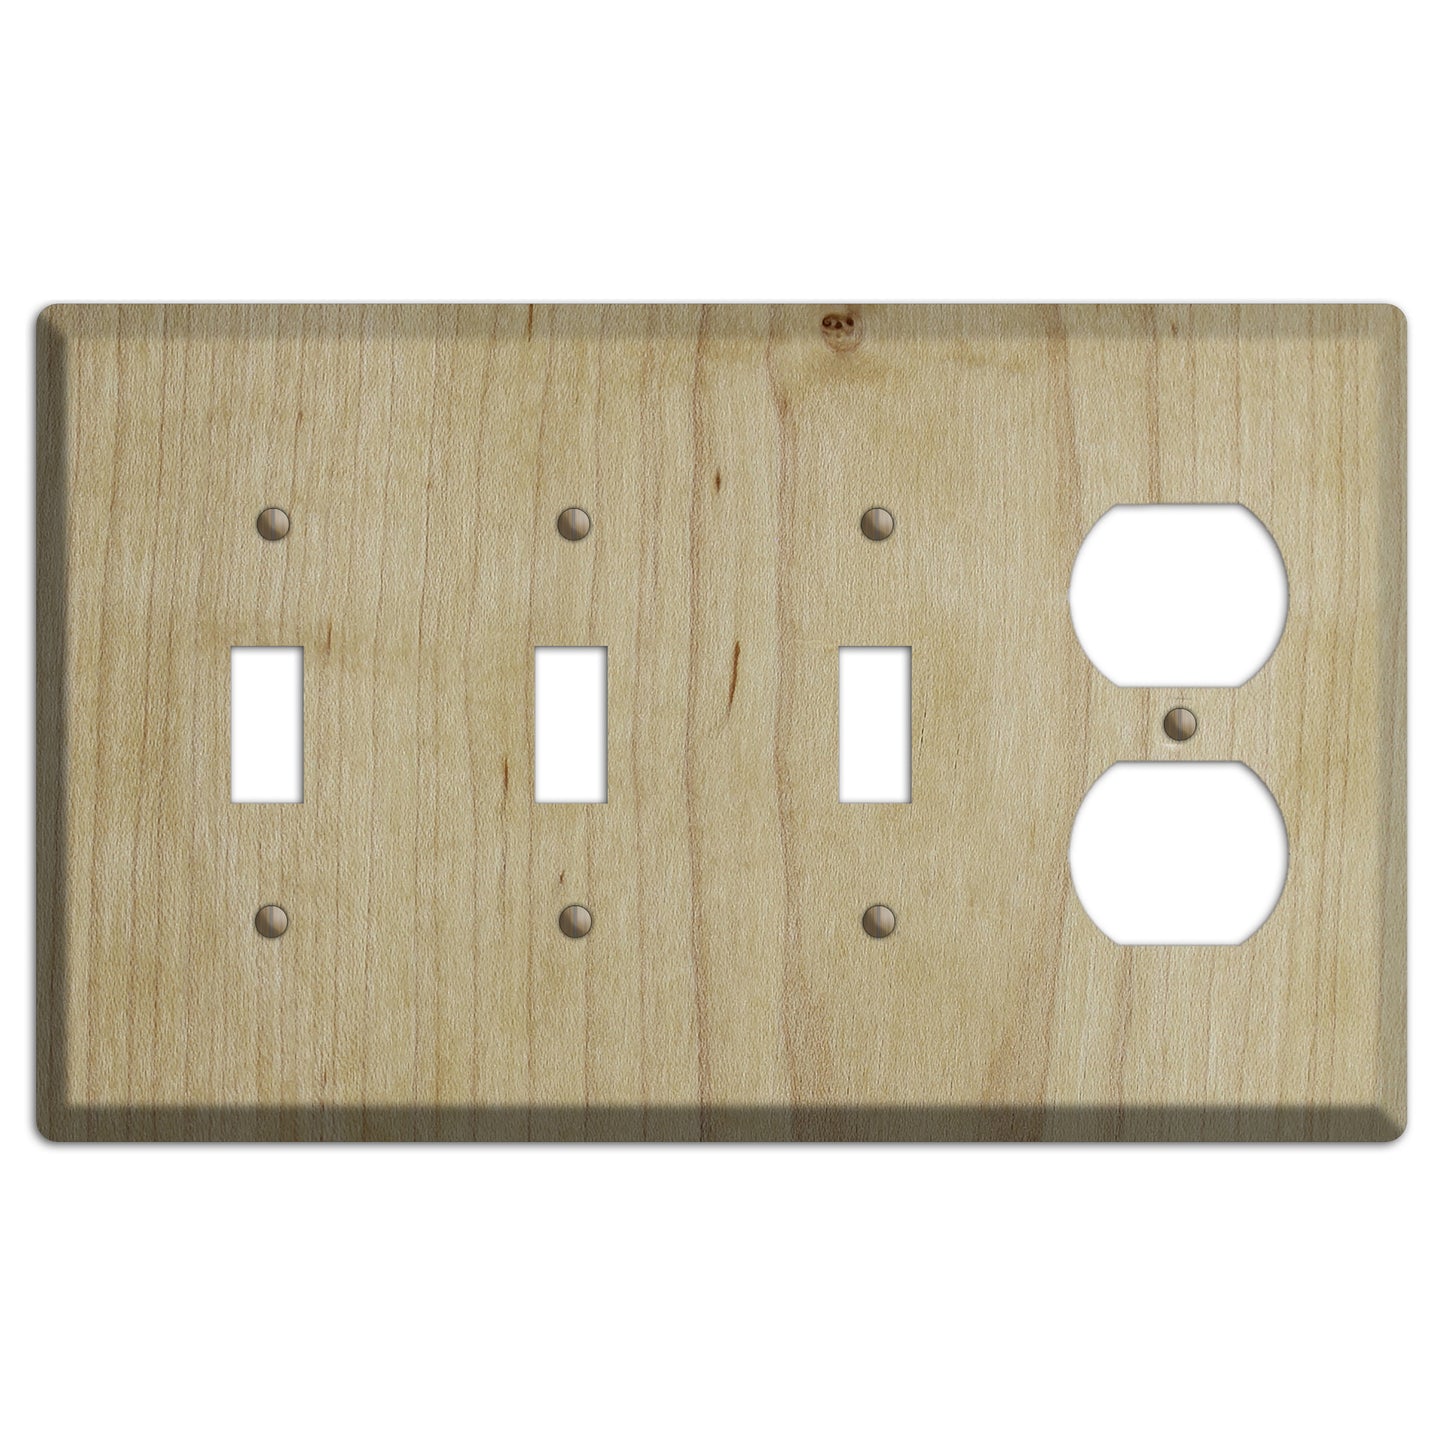 Unfinished Maple Wood 3 Toggle / Duplex Outlet Cover Plate